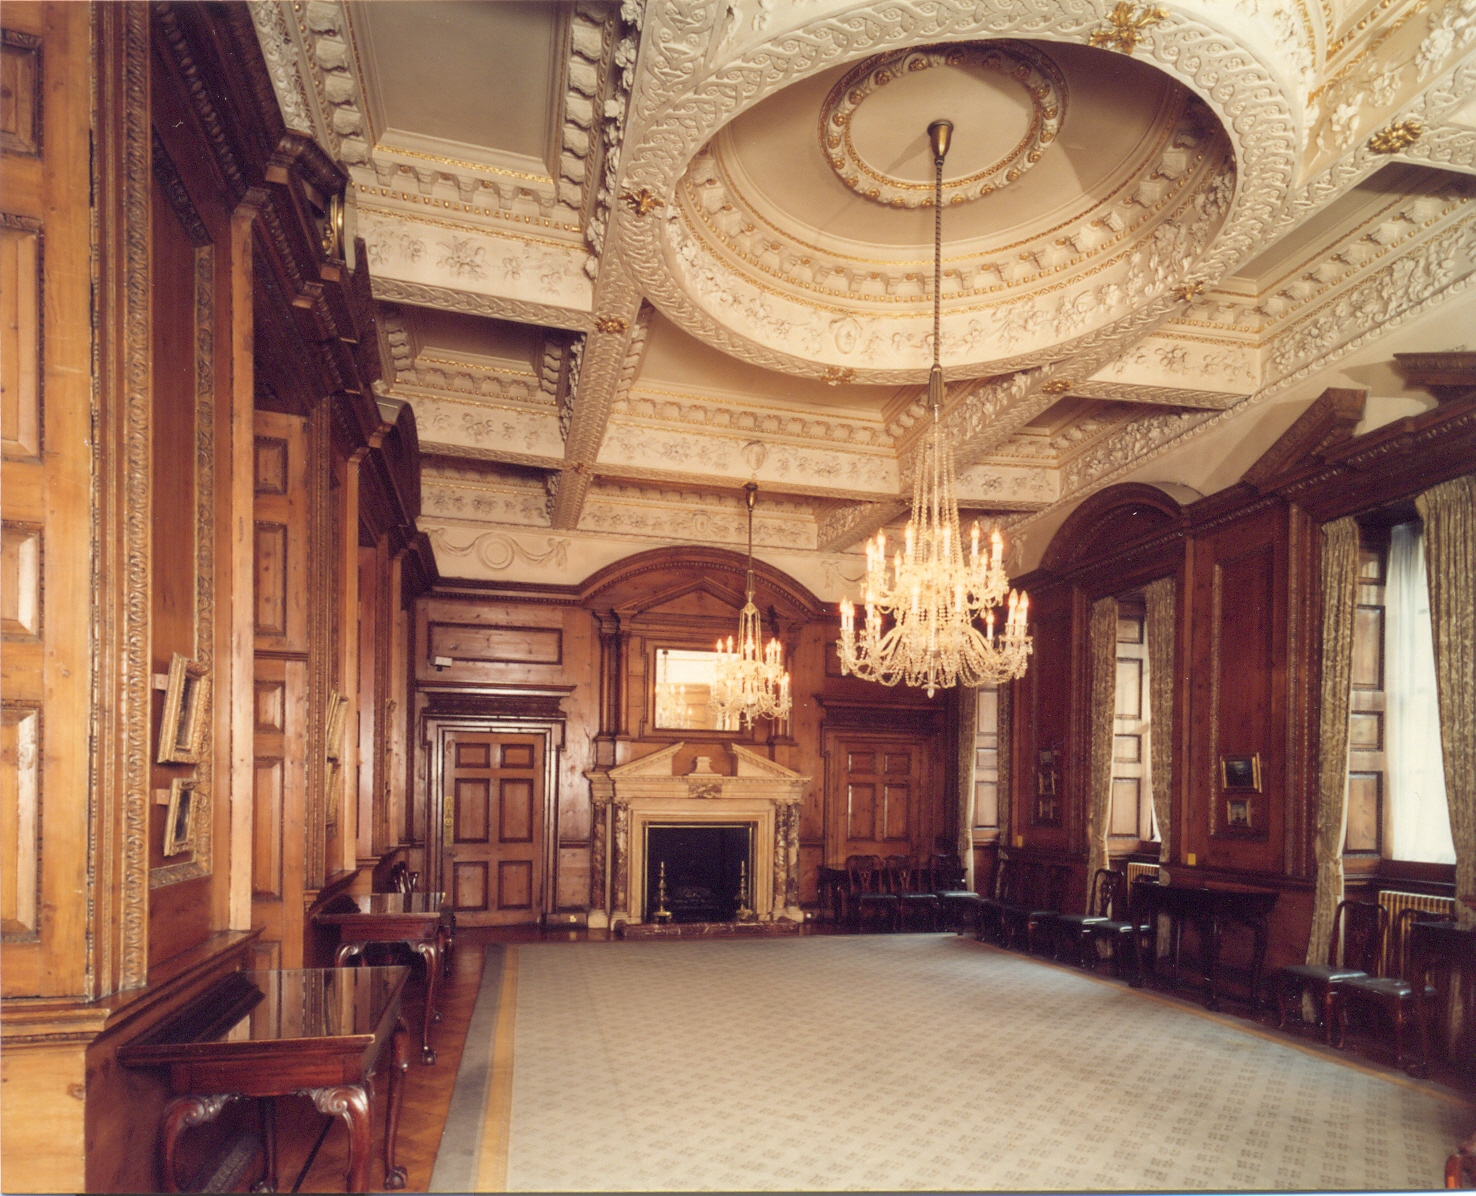 Image 'The Mansion House, London'